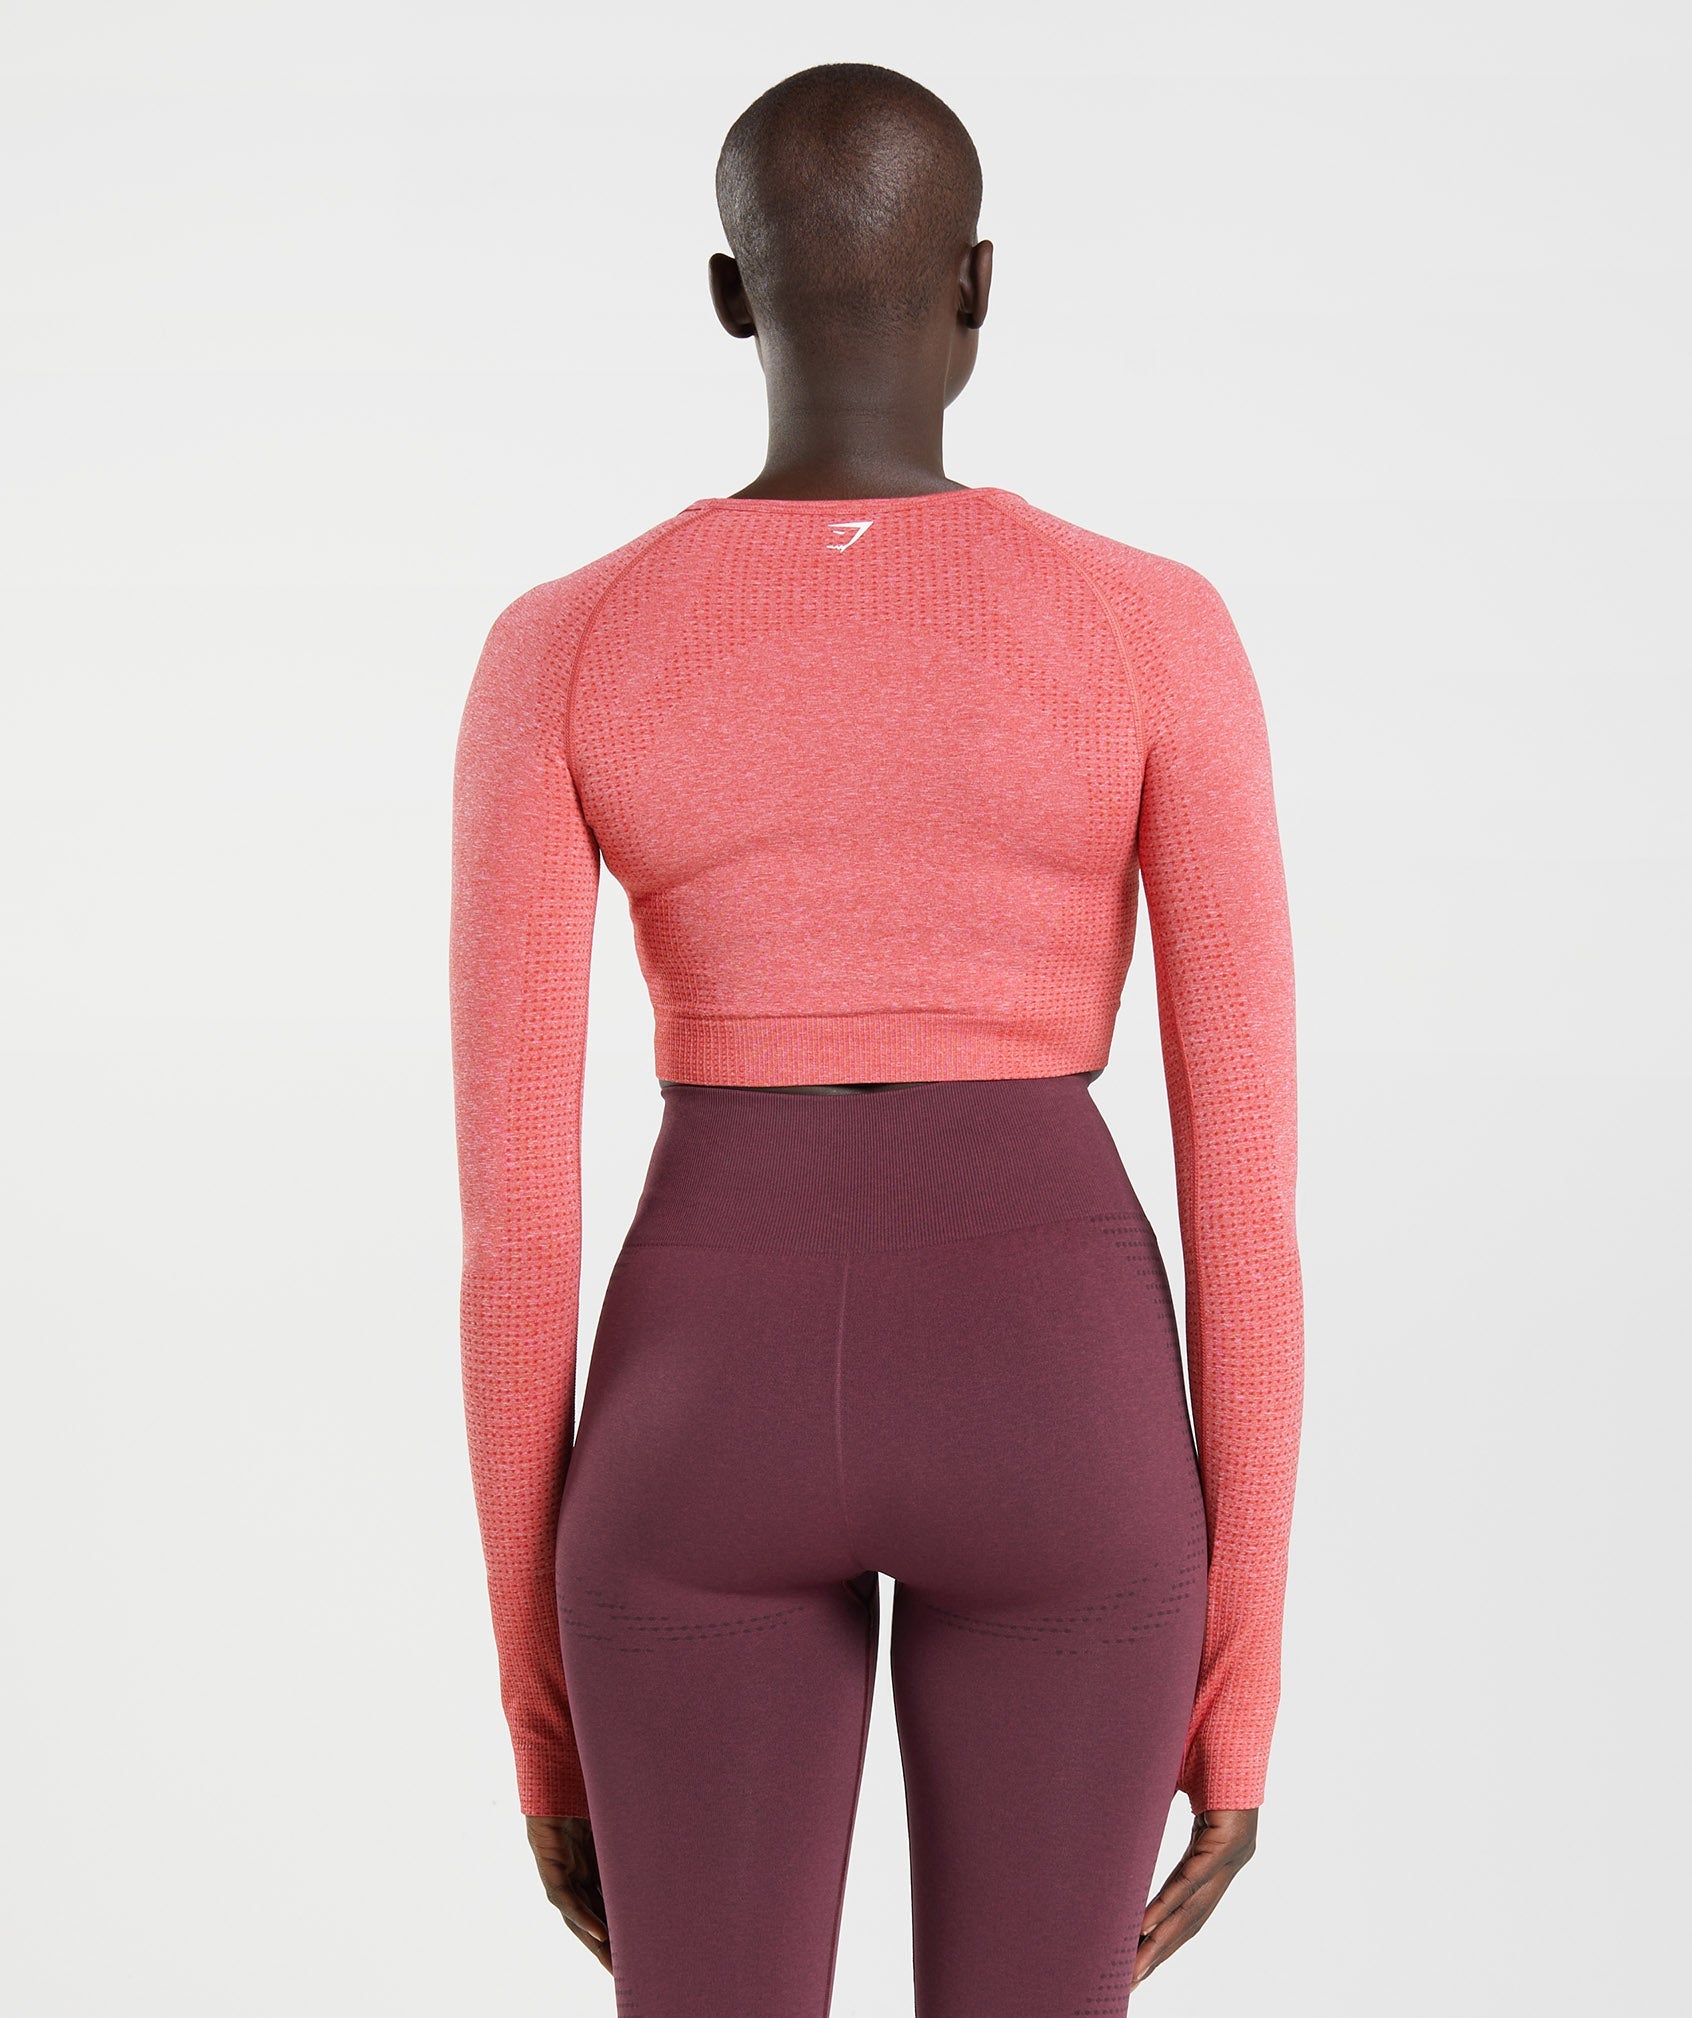 Vital Seamless 2.0 Crop Top in Chilli Red Marl - view 2